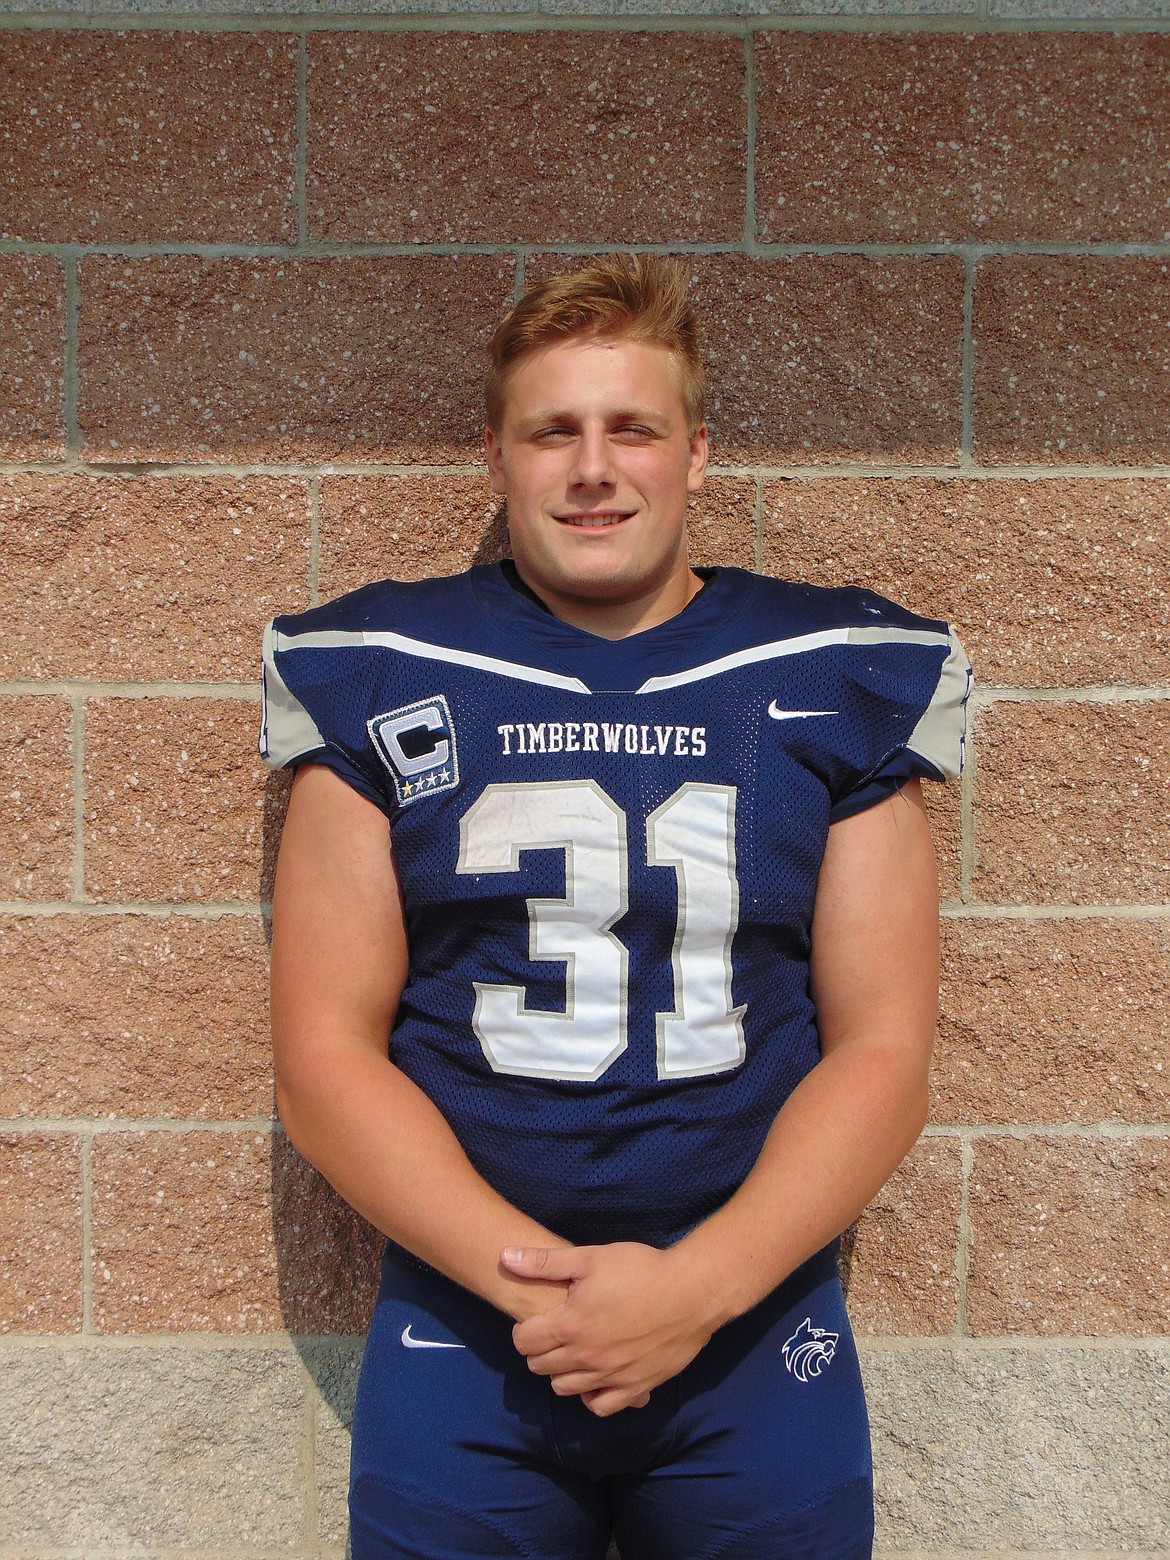 Courtesy photo
Senior Zane Lettau was named Nosworthy&#146;s Hall of Fame Lake City High Offensive Player of the Week. Lettau had 161 yards rushing and 3 touchdowns in the Timberwolves&#146; win against Lakeland.